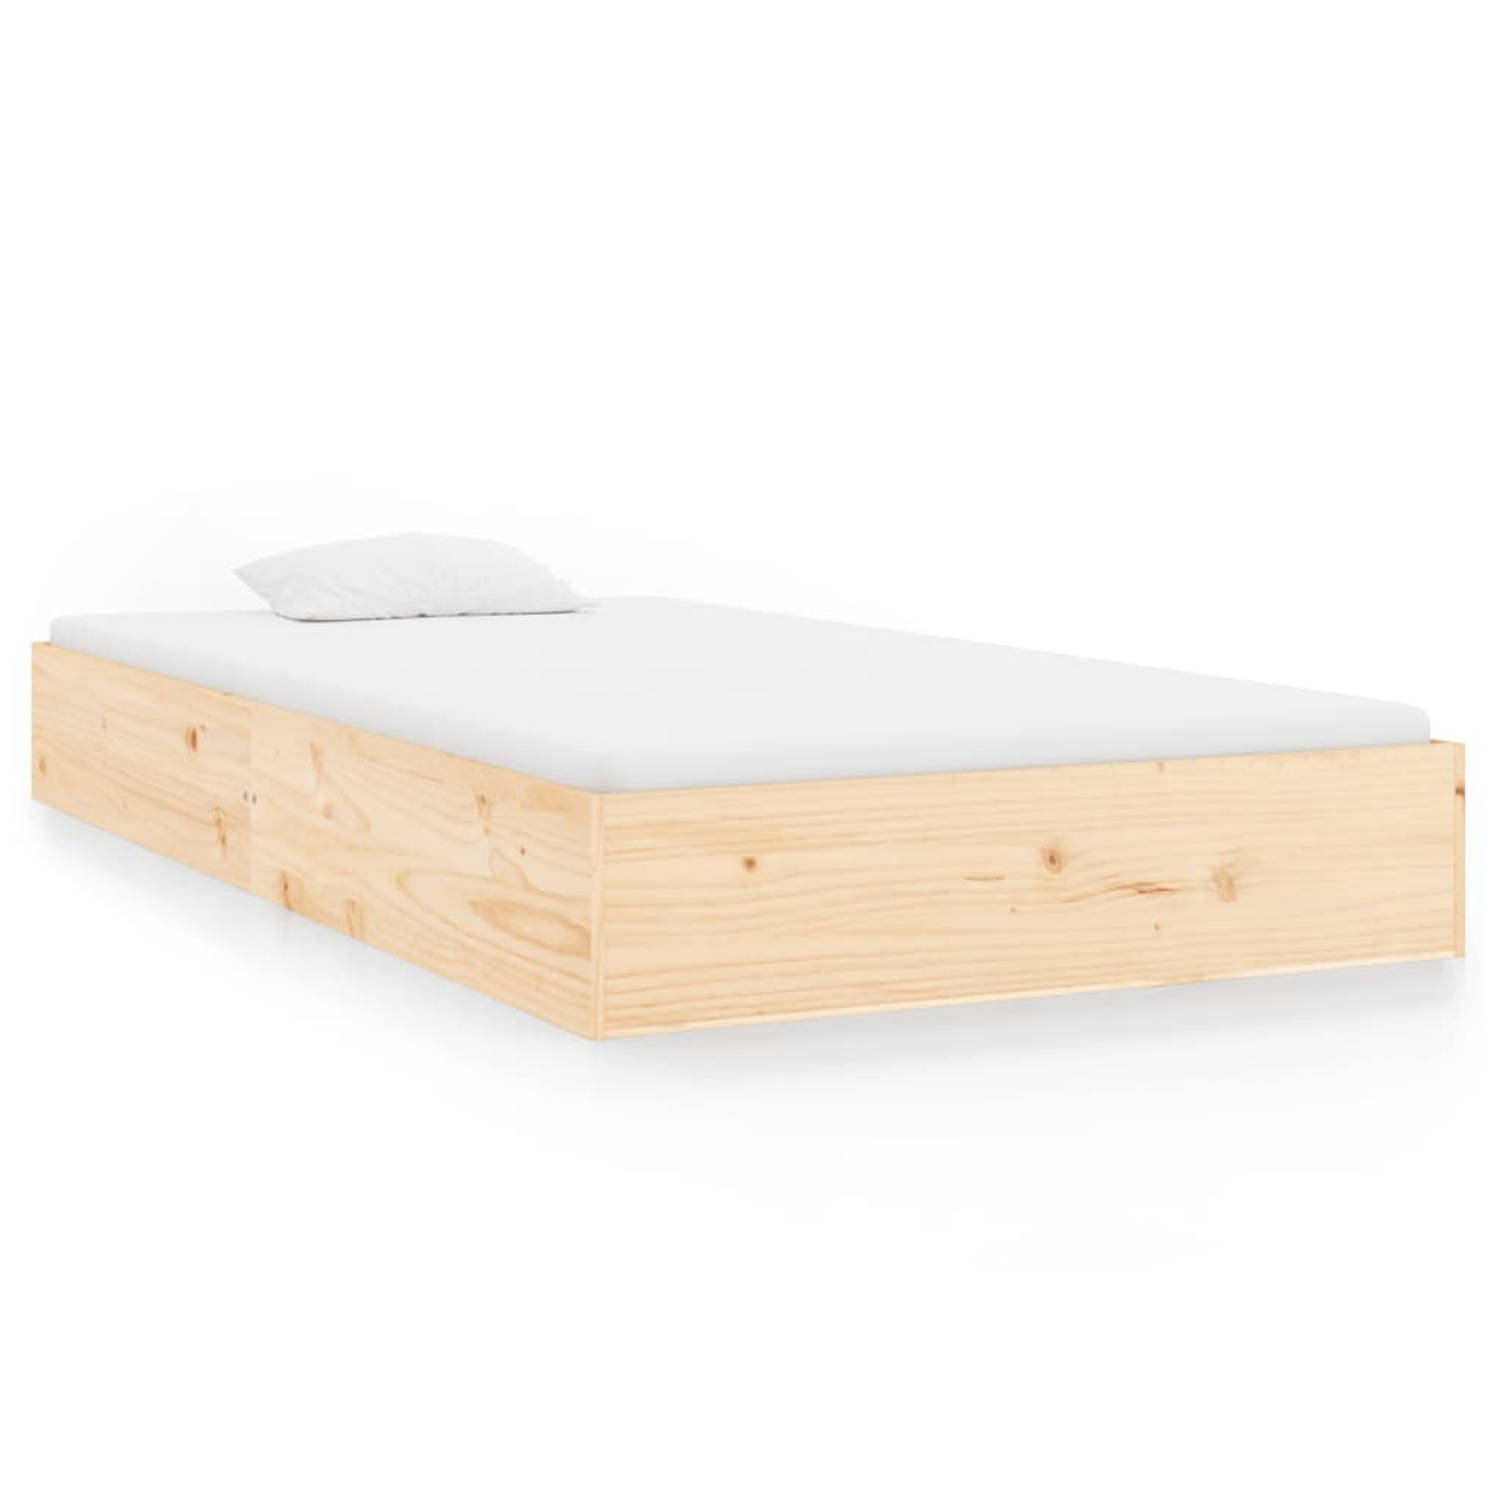 The Living Store Bedframe massief hout 100x200 cm - Bed